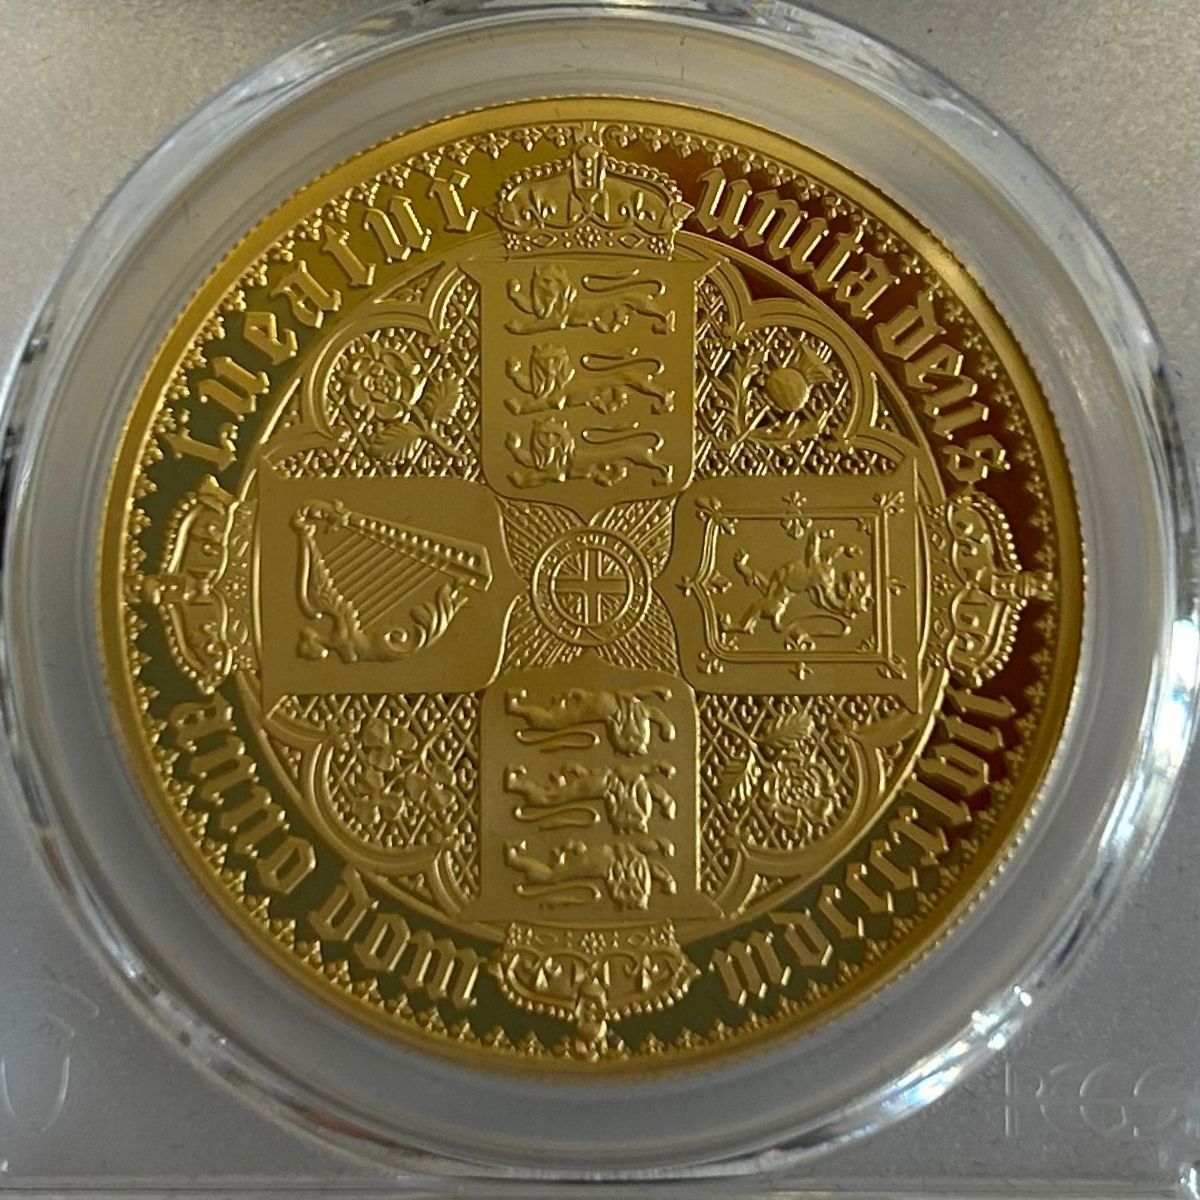 2021 Alderney New Gothic Crown Cruciform Shields Two Ounce Gold Proof Coin PCGS Graded PR70DCAM Reverse